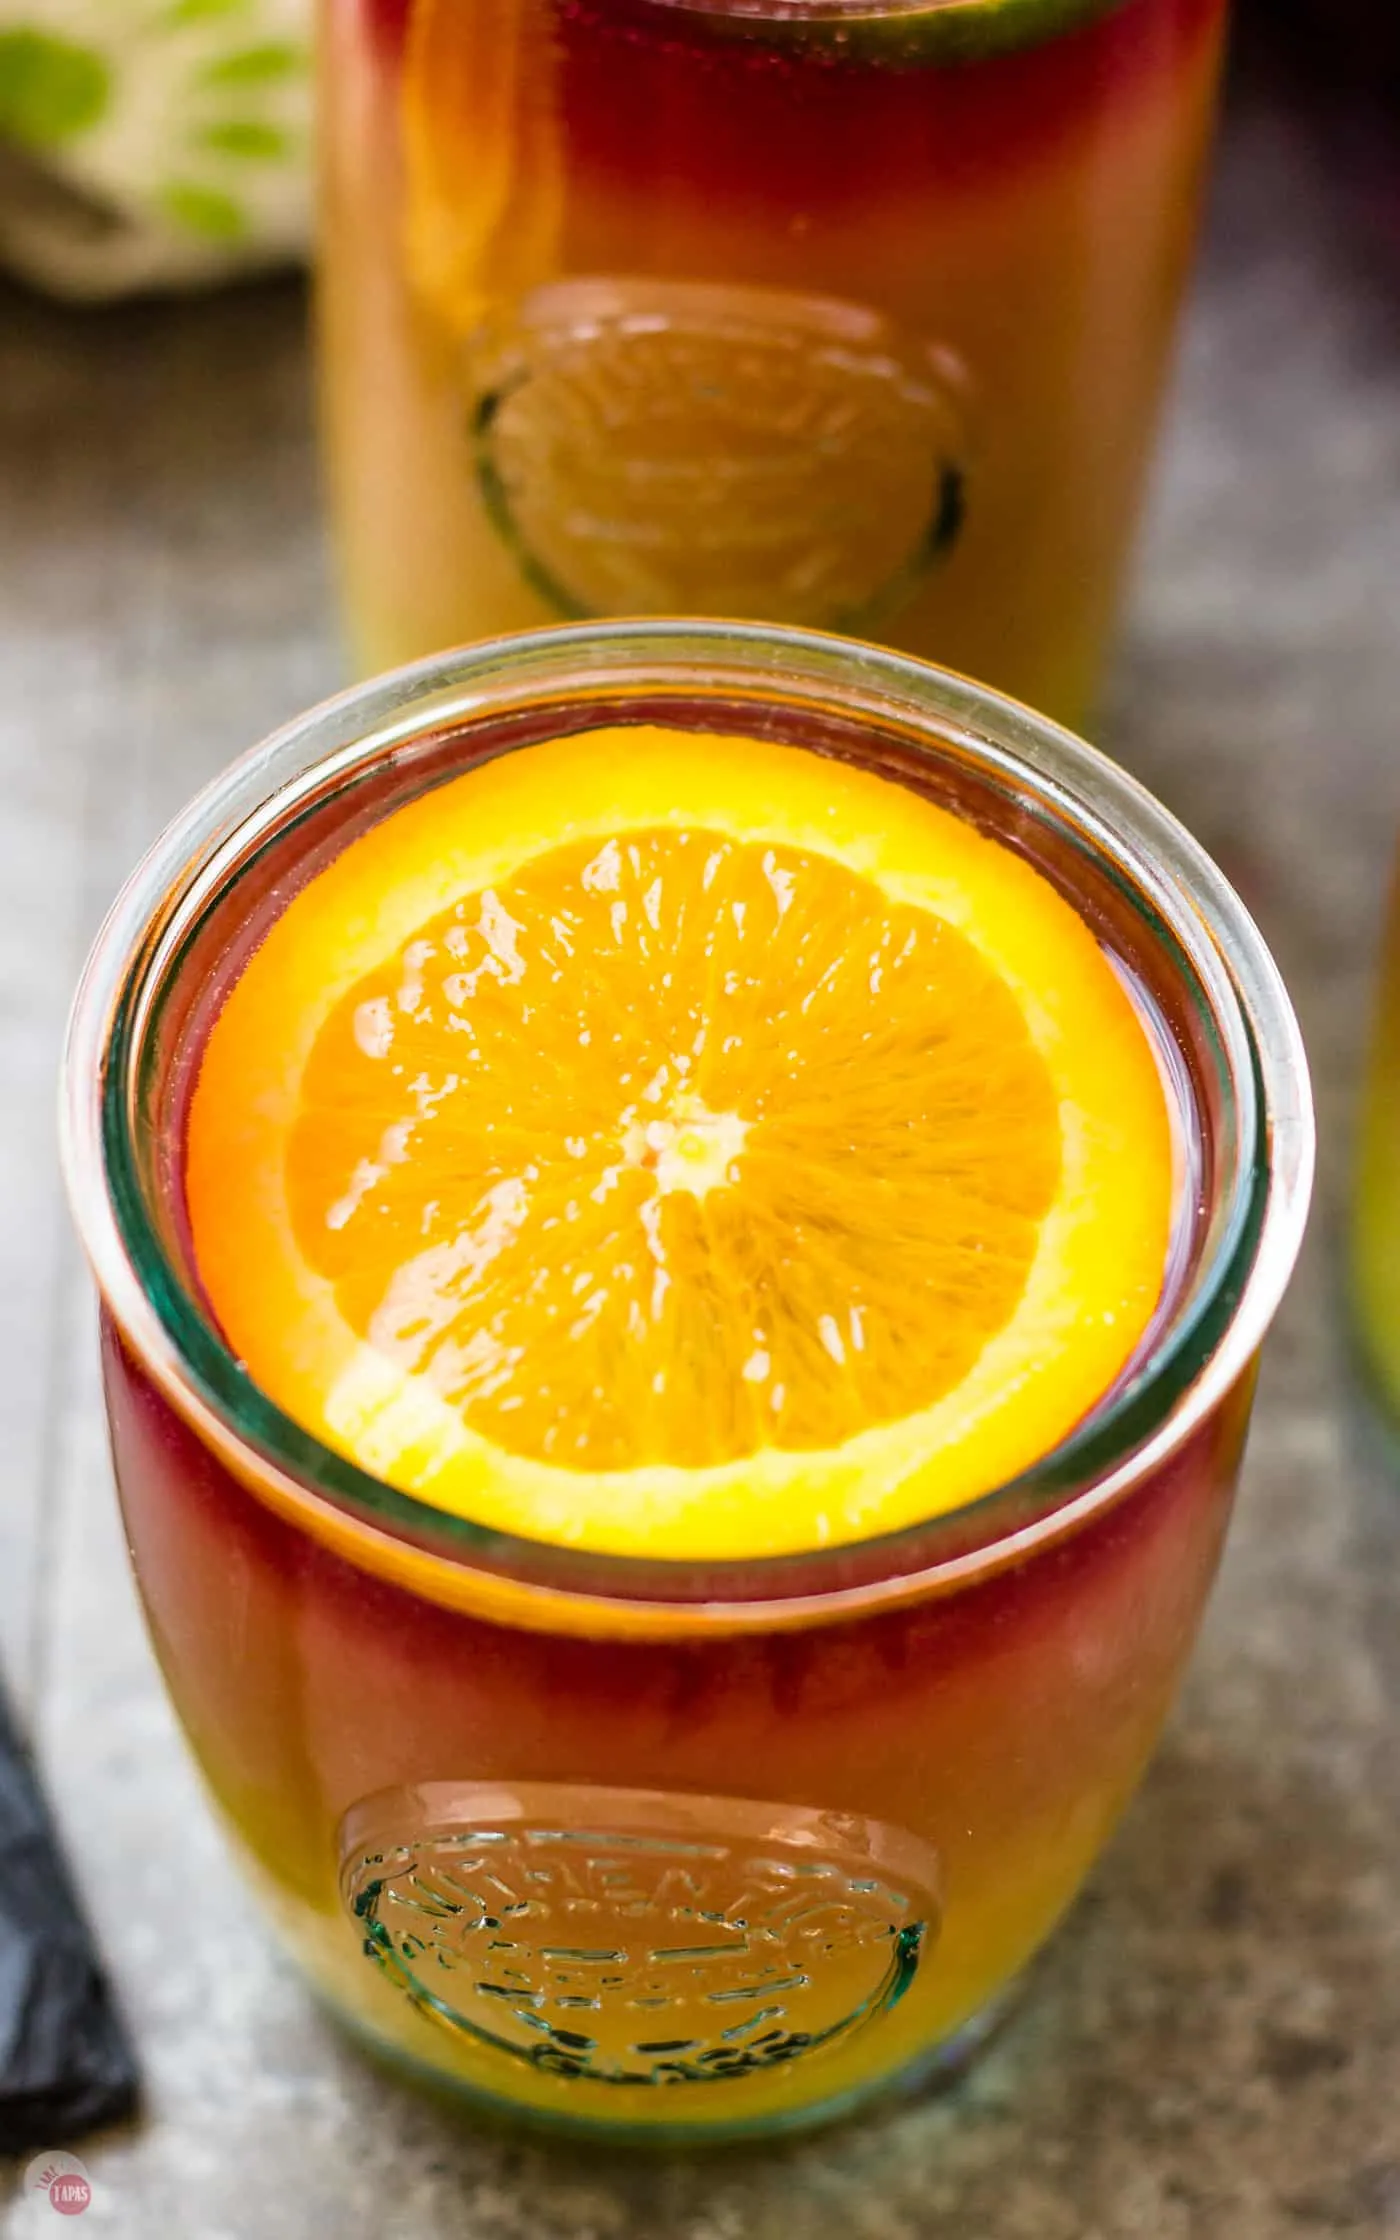 A slice of your favorite fruit is your tool for getting the layered look in your Sangria Sunrise | Take Two Tapas | #Sangria #TequilaSunrise #LayeredCocktail #OrangeJuice #TequilaCocktails #BrunchCocktails